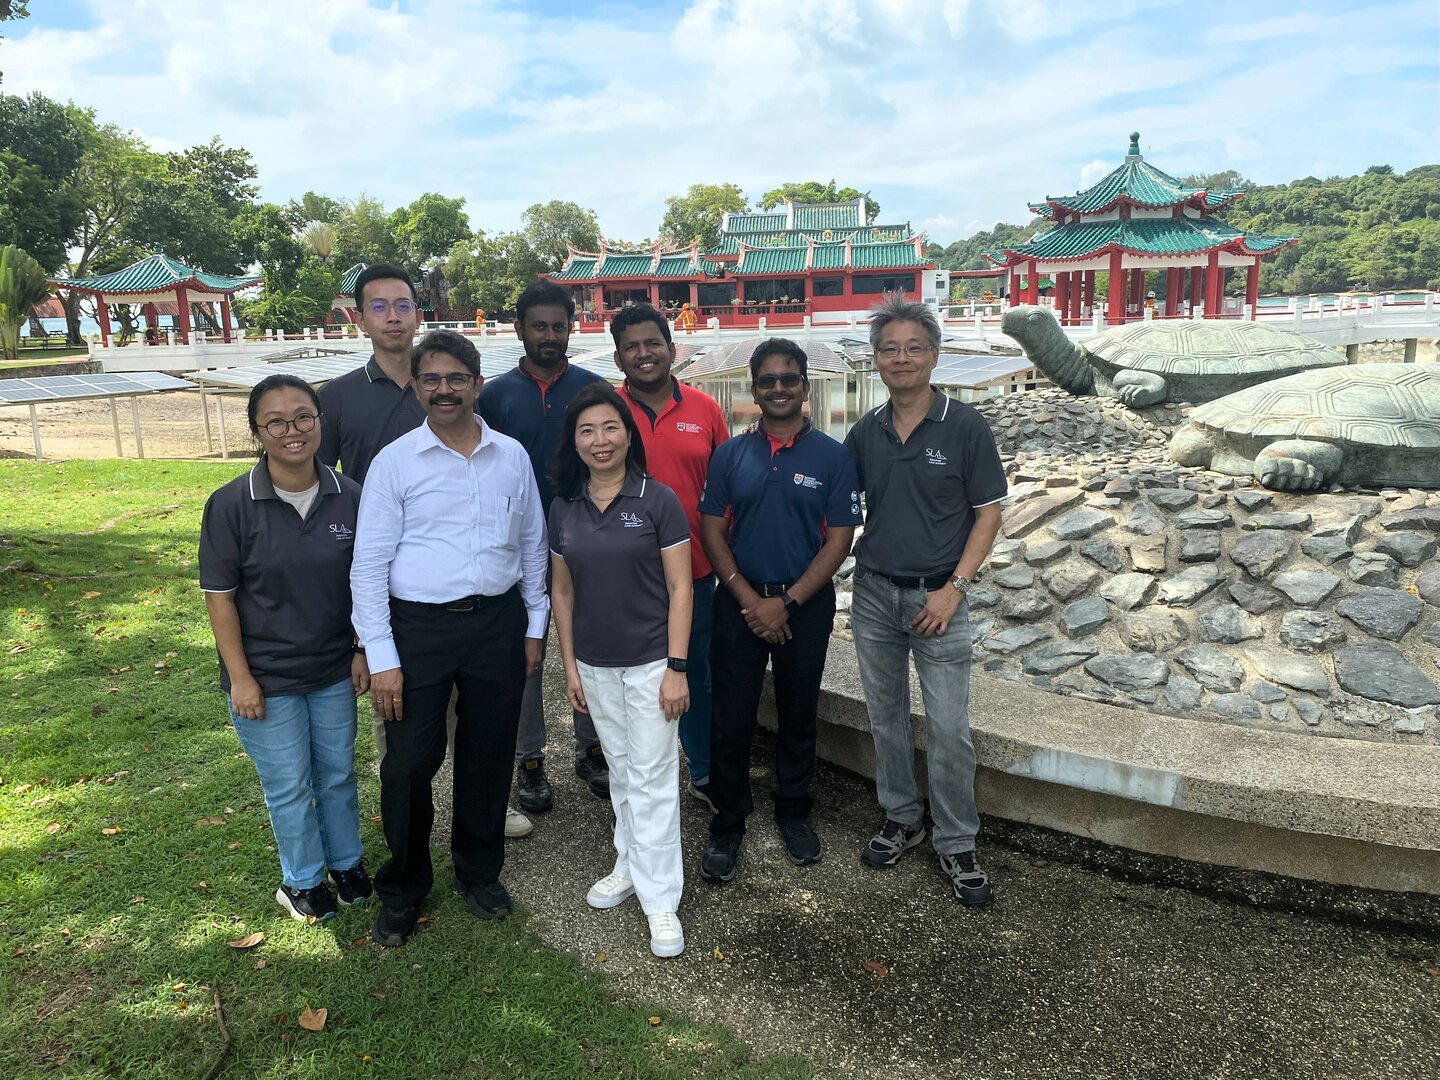 The team from ERI@N and SLA photographed in front of the photovoltaic panels on Kusu Island, Singapore